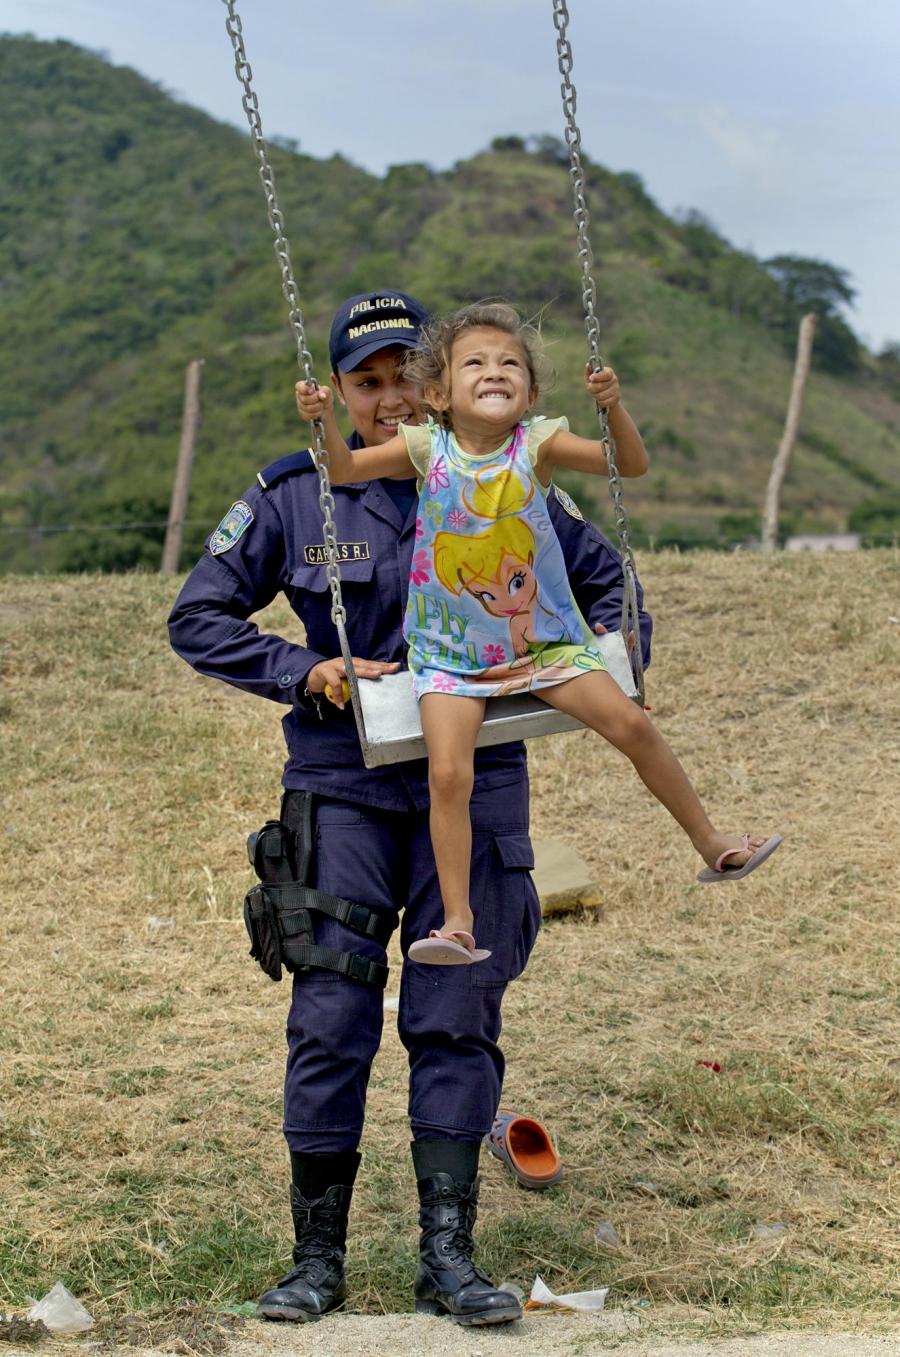 Honduran police officer Julisa Carias gives Jireh López, 4, a push on a swing in Chamelecón, a neighborhood in San Pedro Sula.